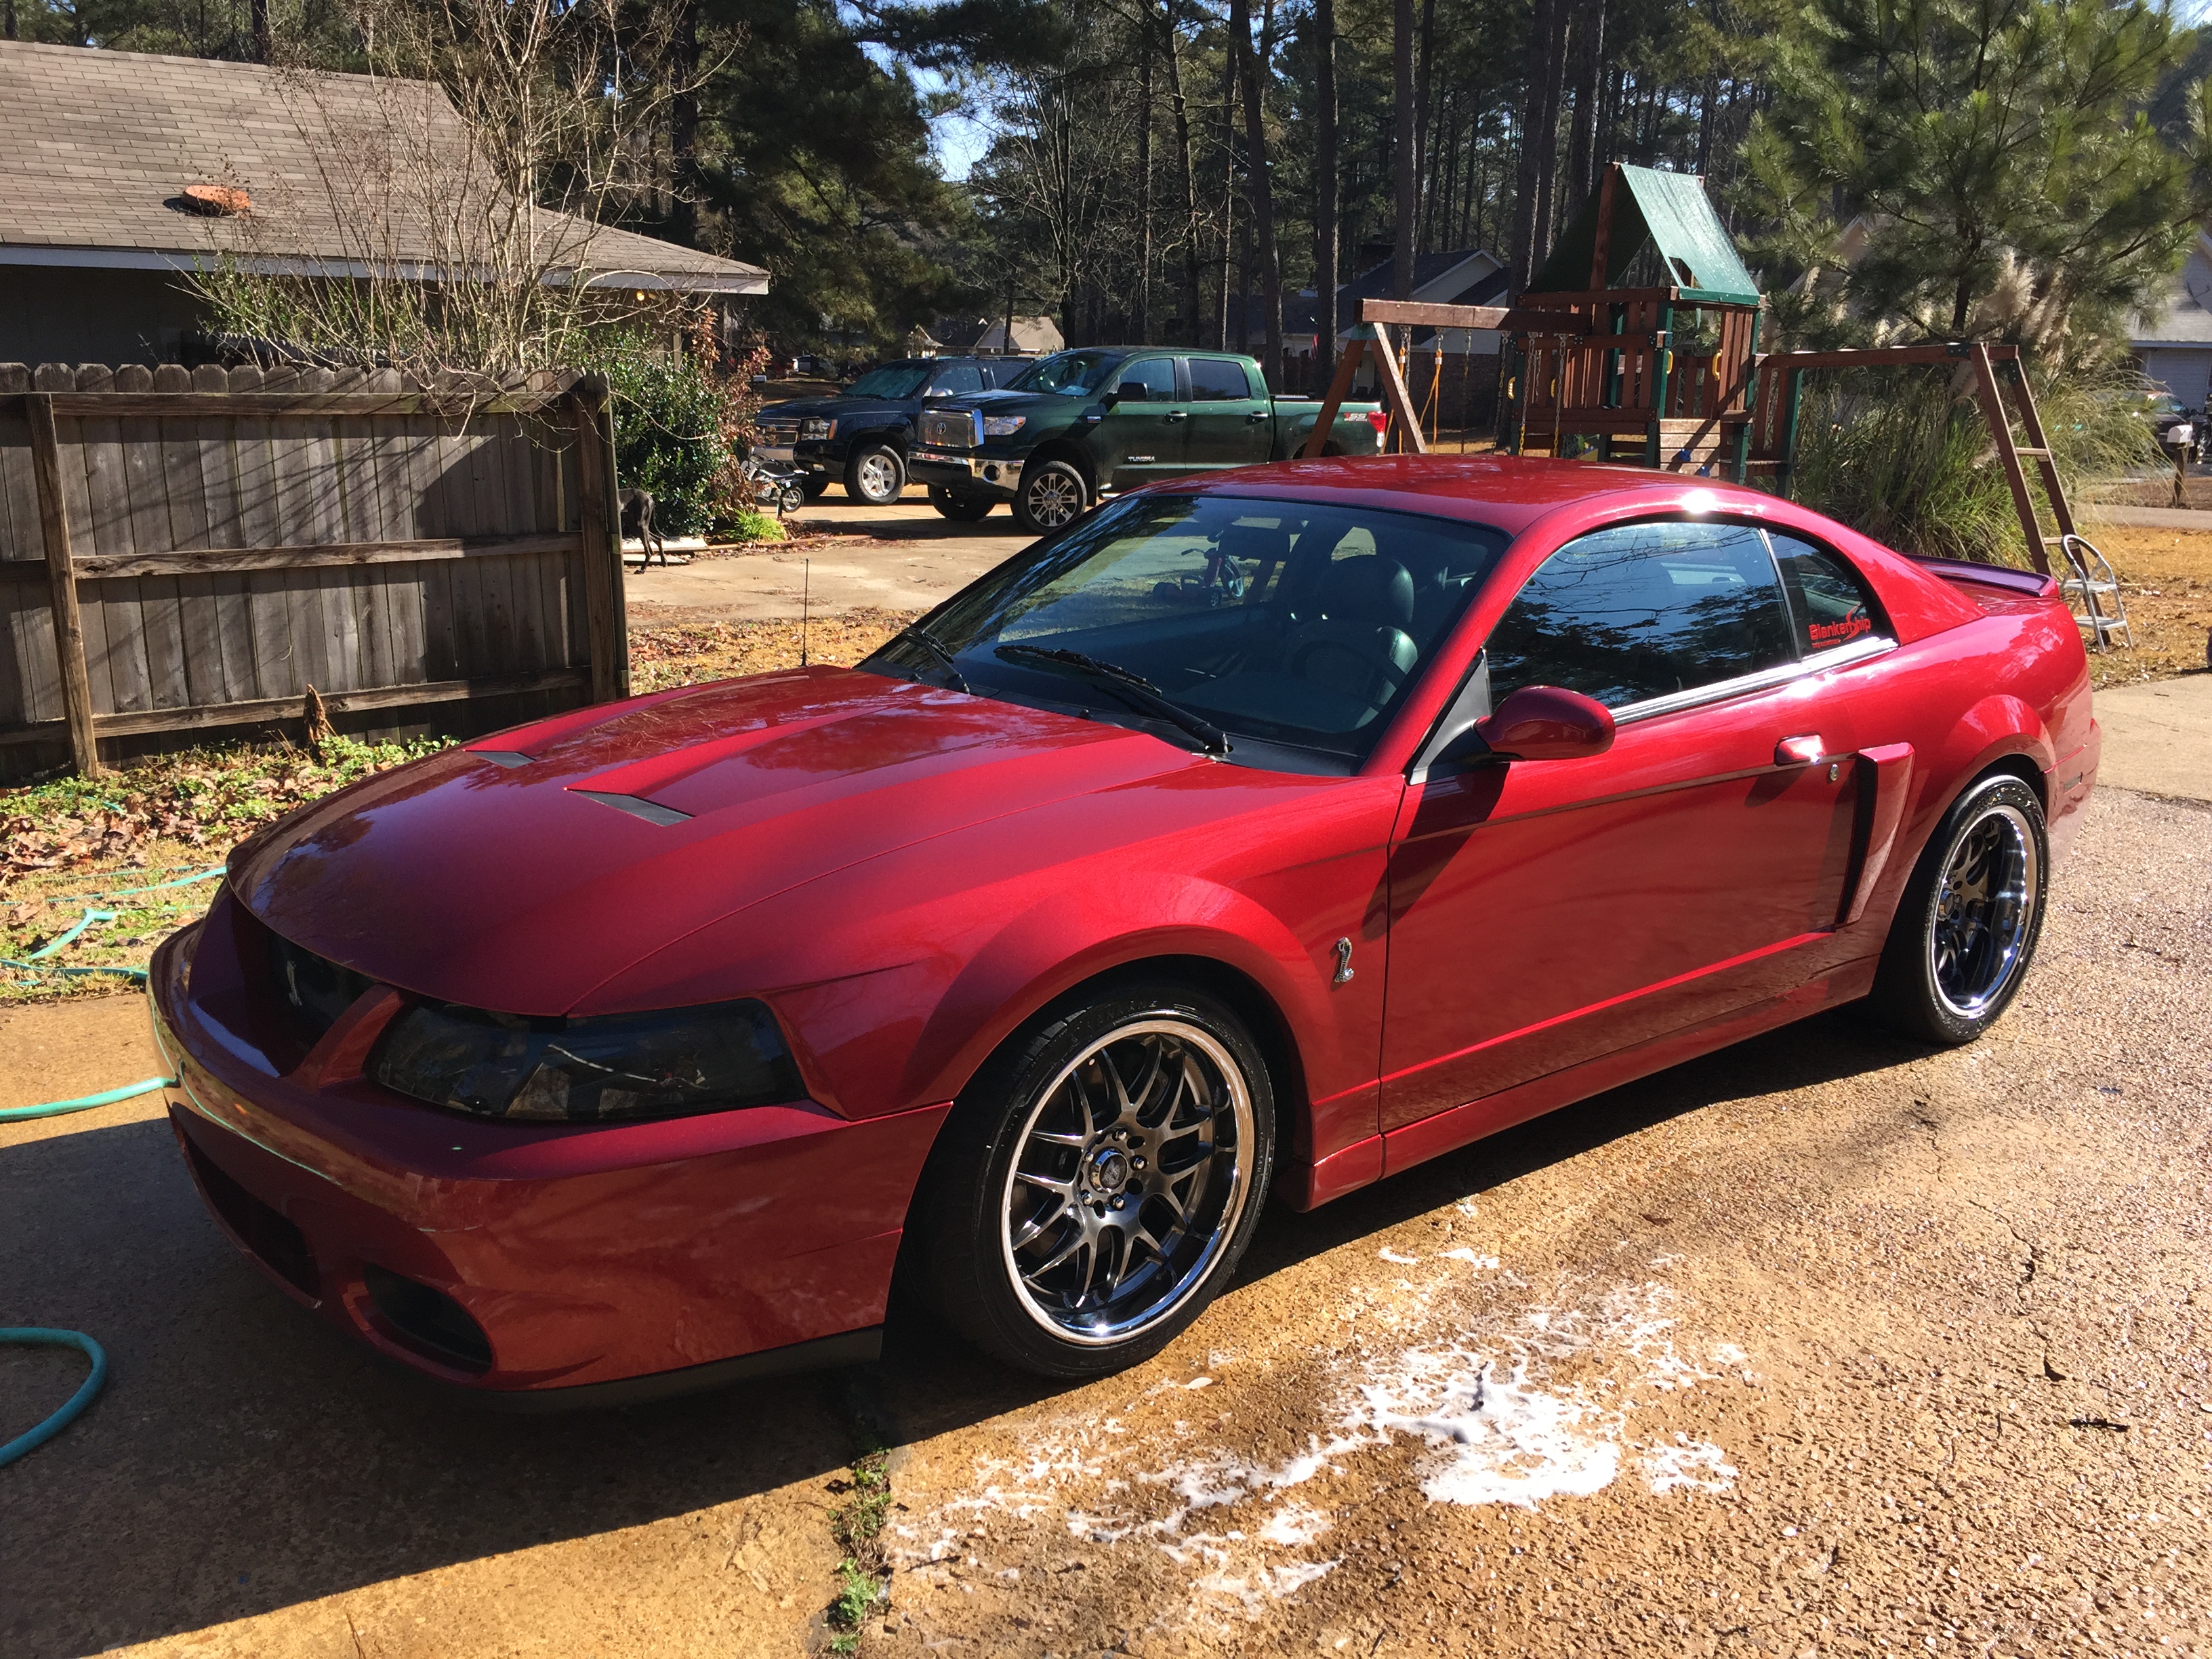 Mustang Terminator 2004 For Sale